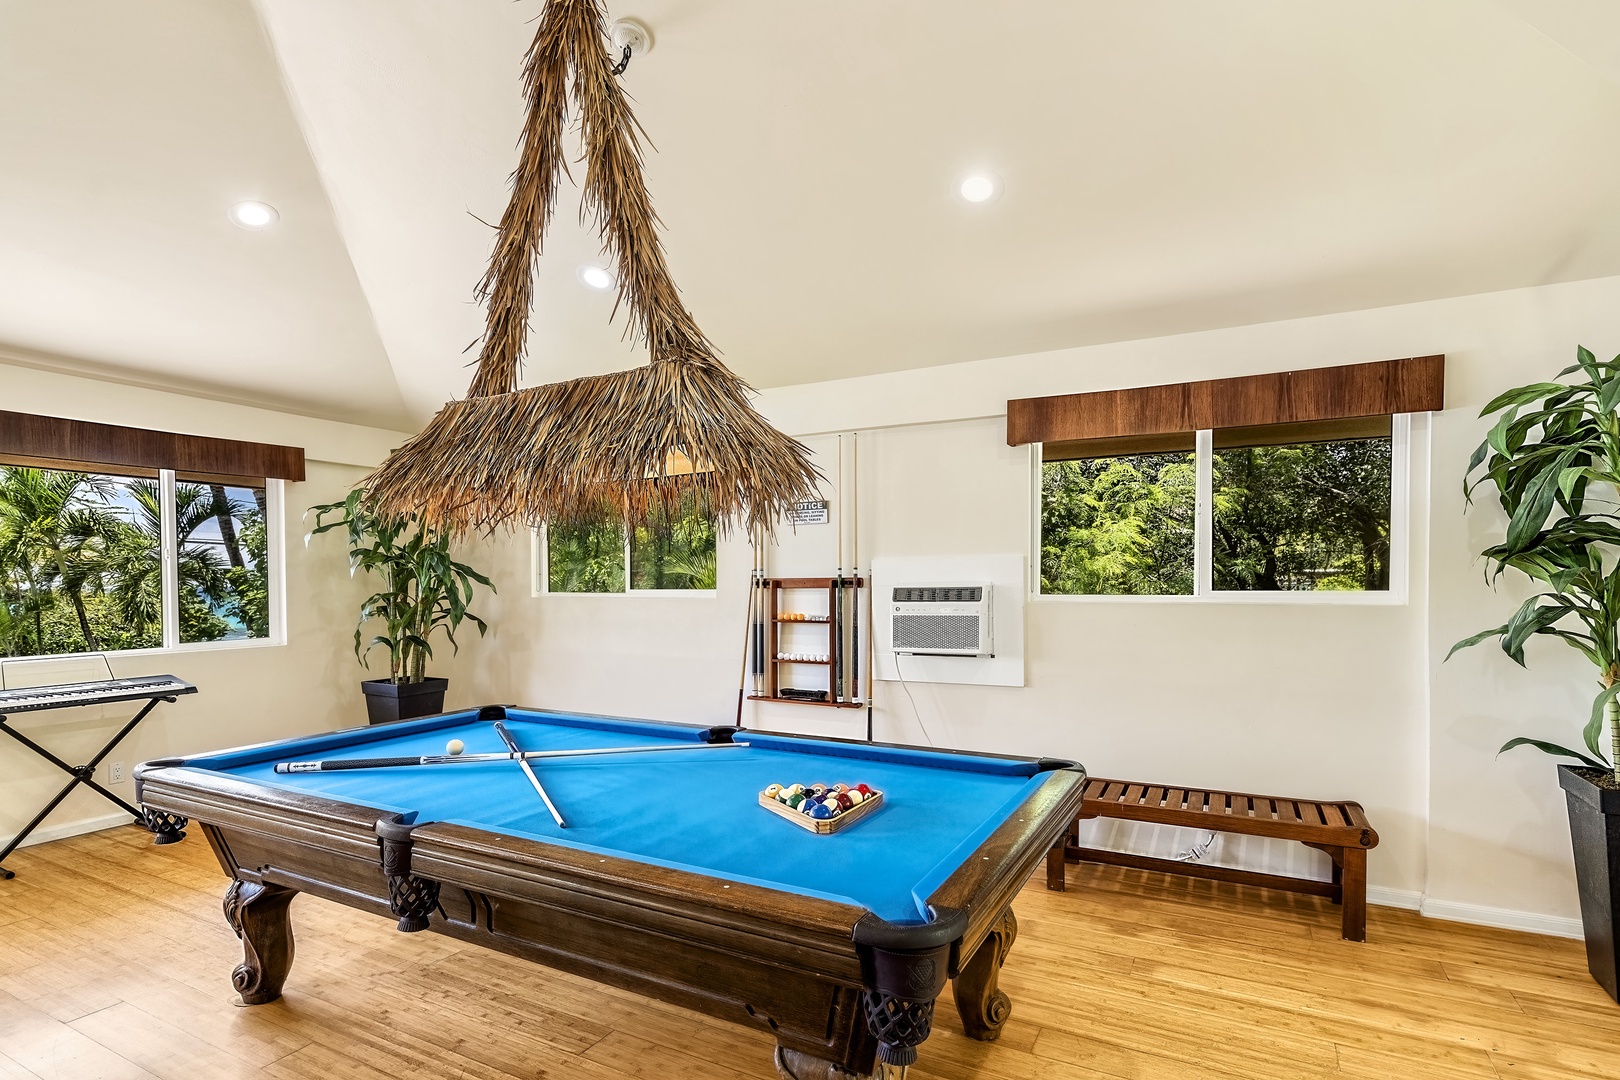 Kailua Kona Vacation Rentals, Lymans Bay Hale - Play a game of pool on the competition size table